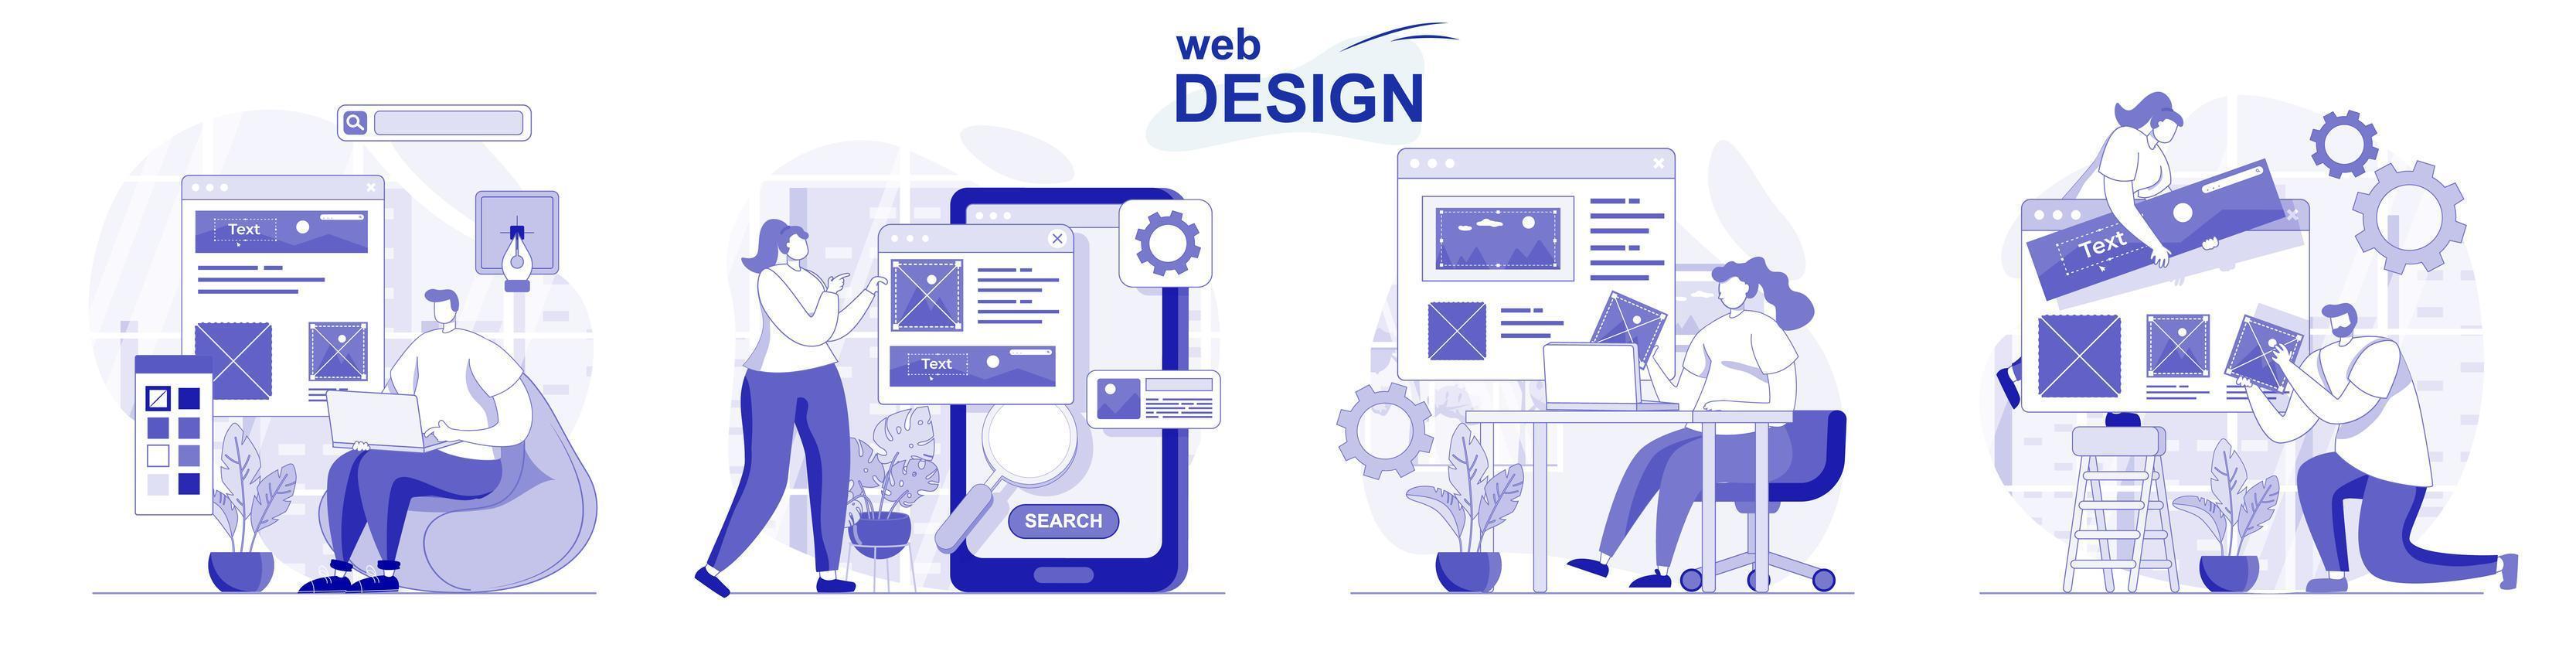 Web design isolated set in flat design. People create and place graphic elements at site layout, collection of scenes. Vector illustration for blogging, website, mobile app, promotional materials.